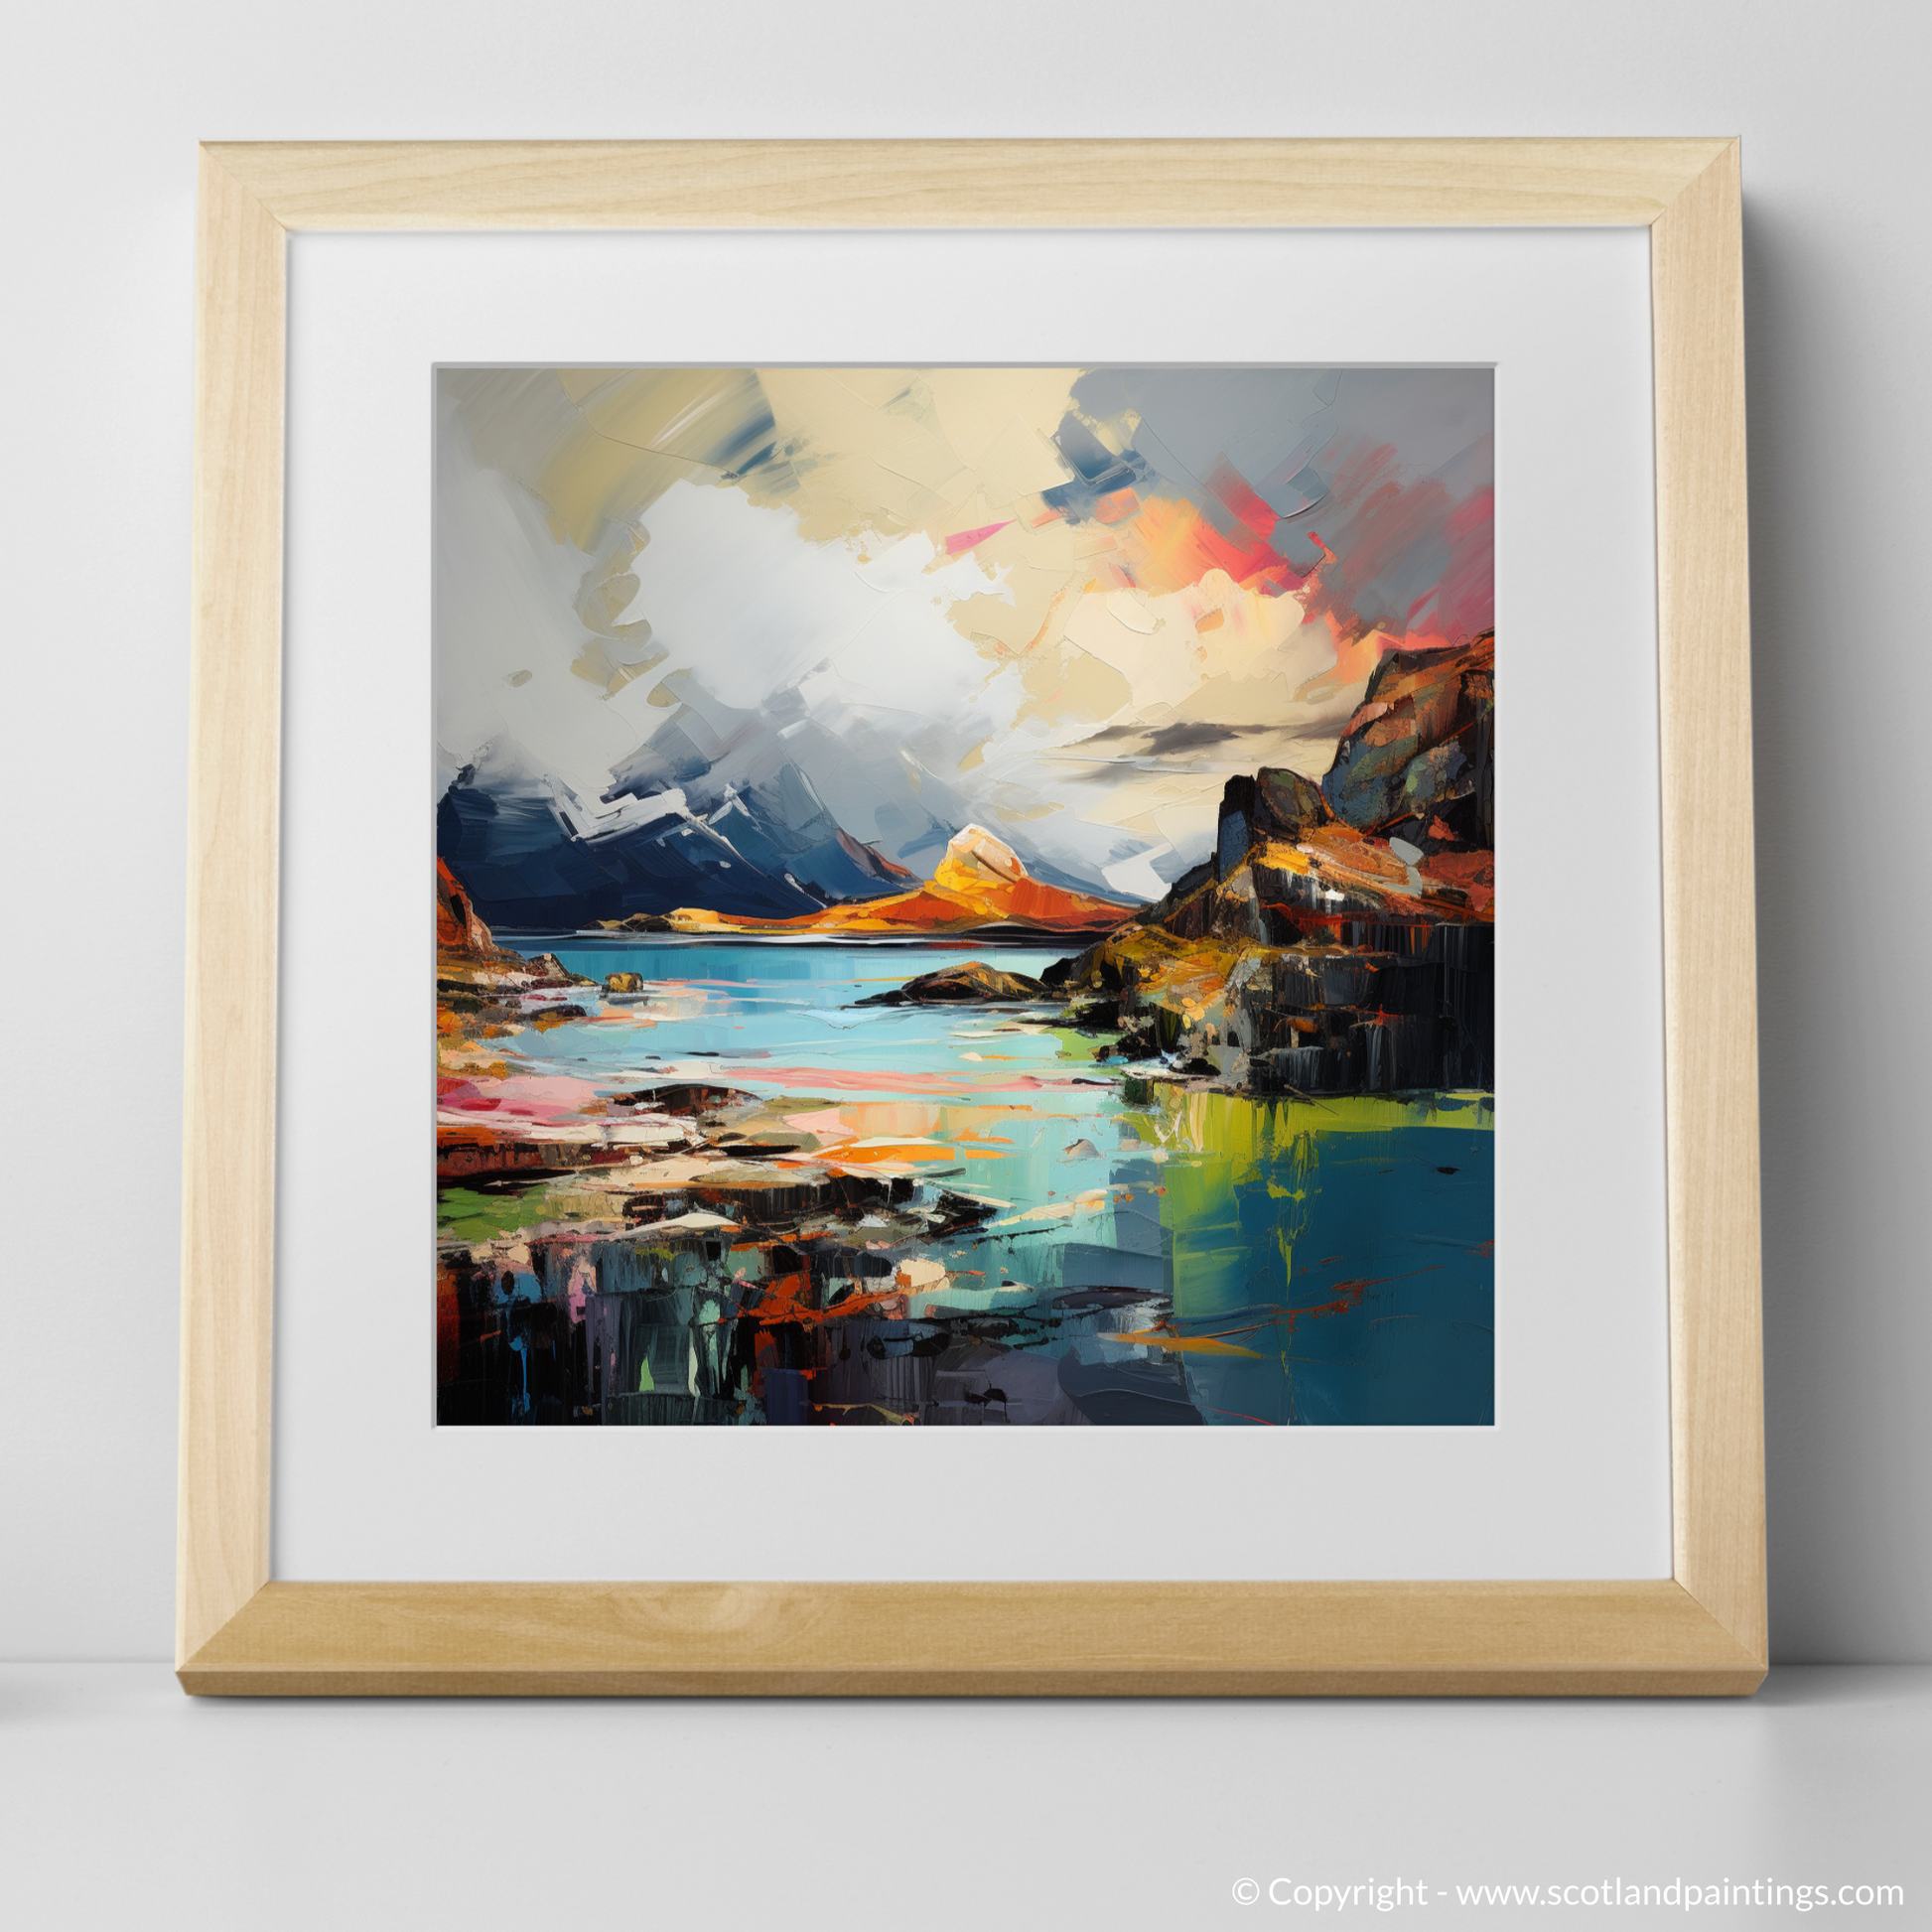 Art Print of Isle of Skye's smaller isles, Inner Hebrides with a natural frame